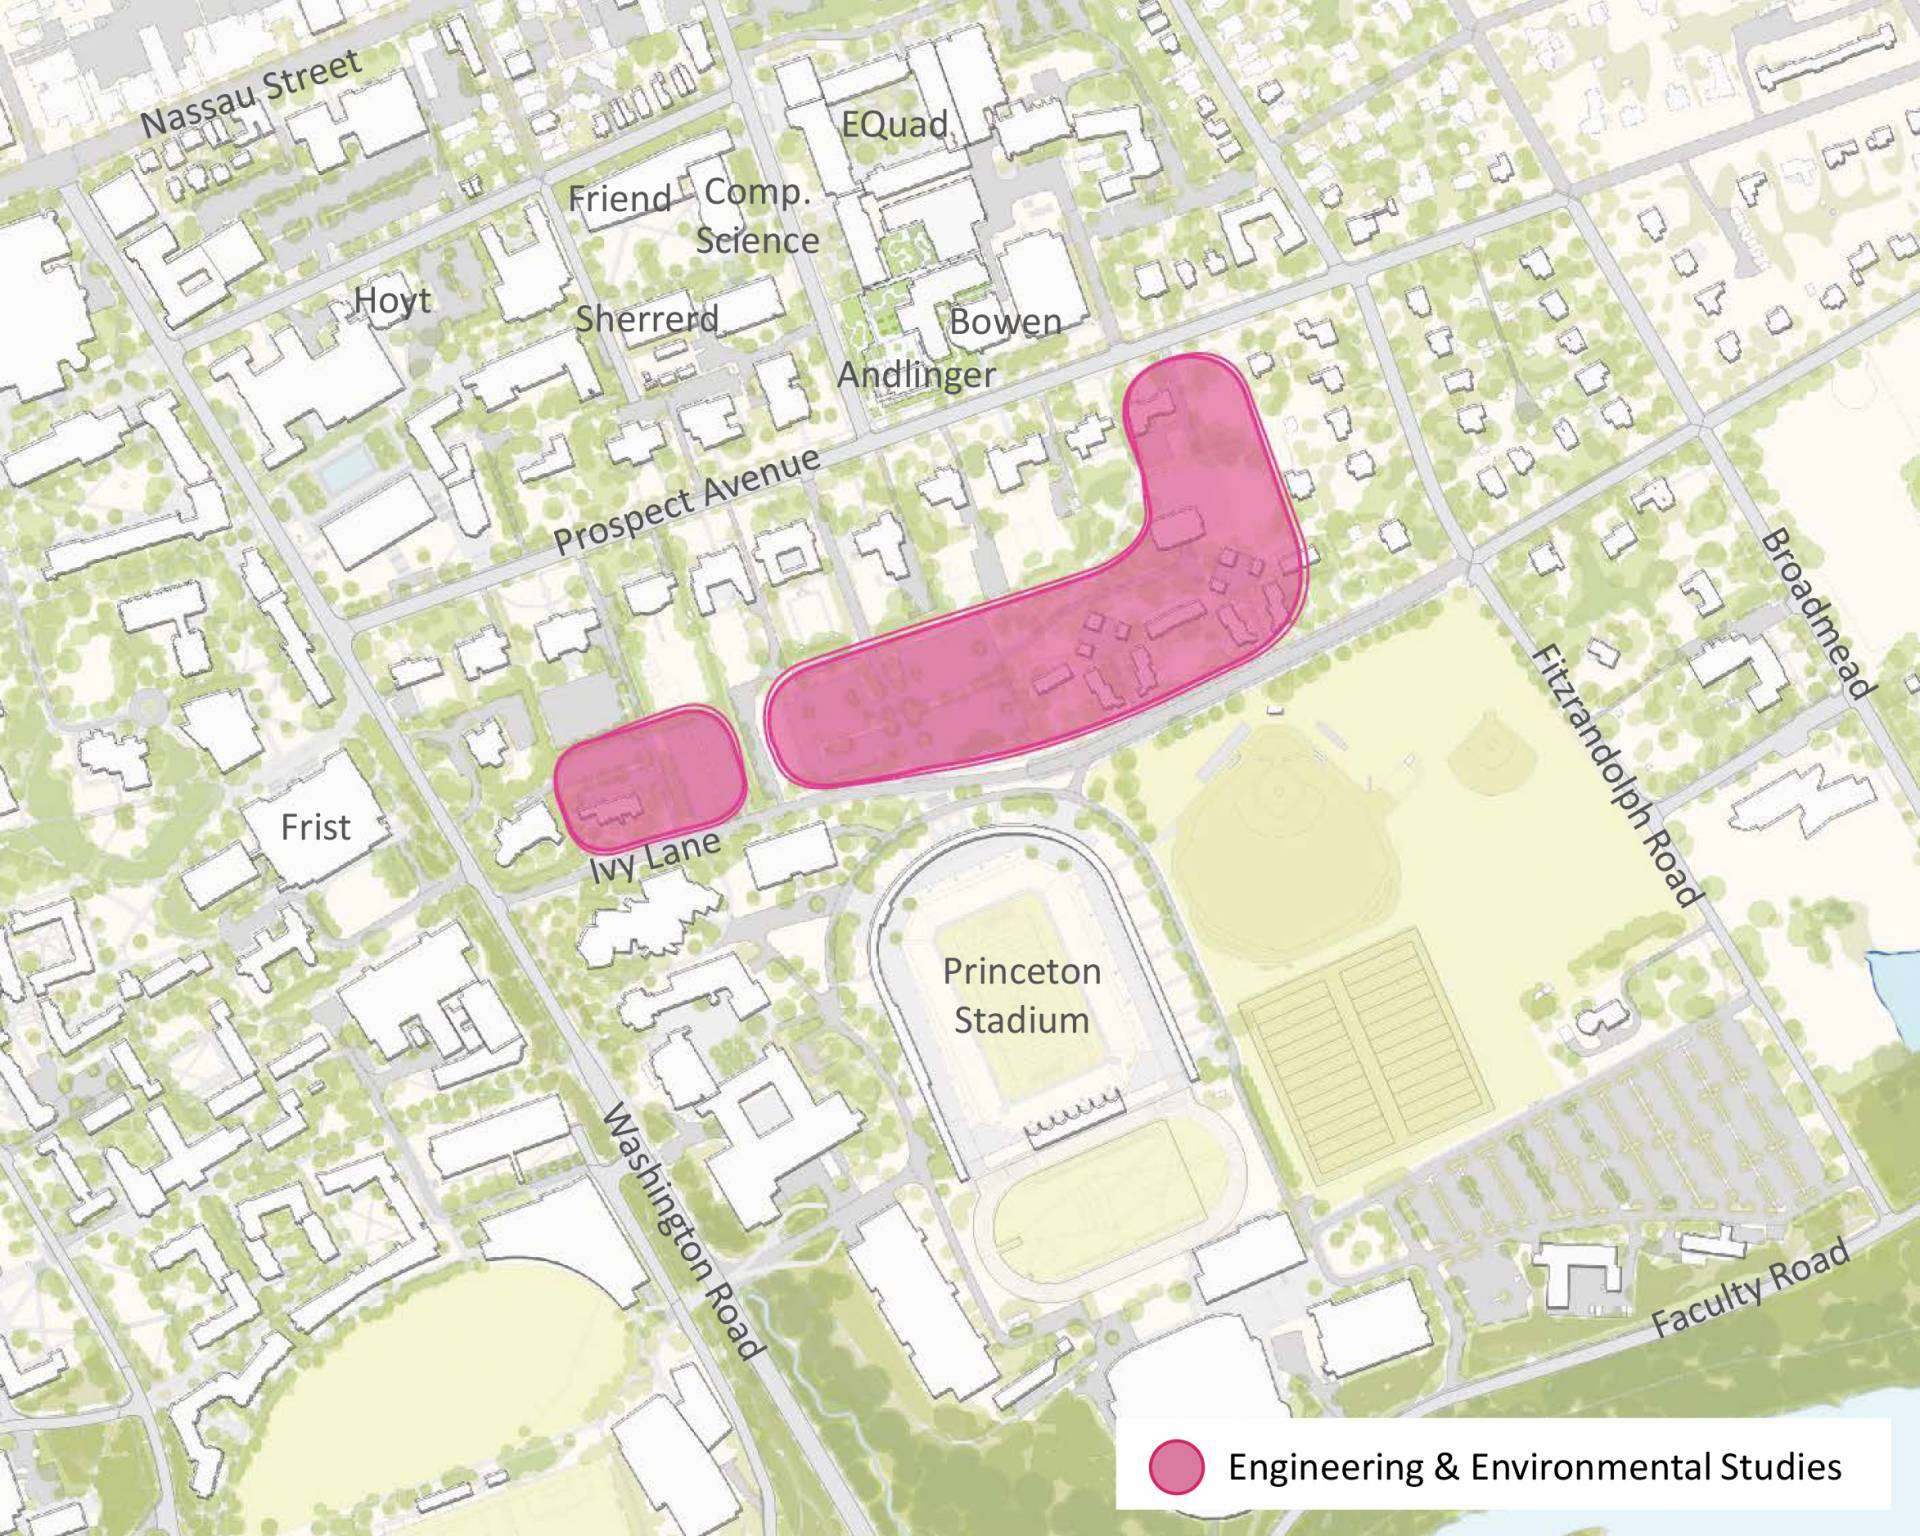 Map showing potential sites for engineering and environmental studies